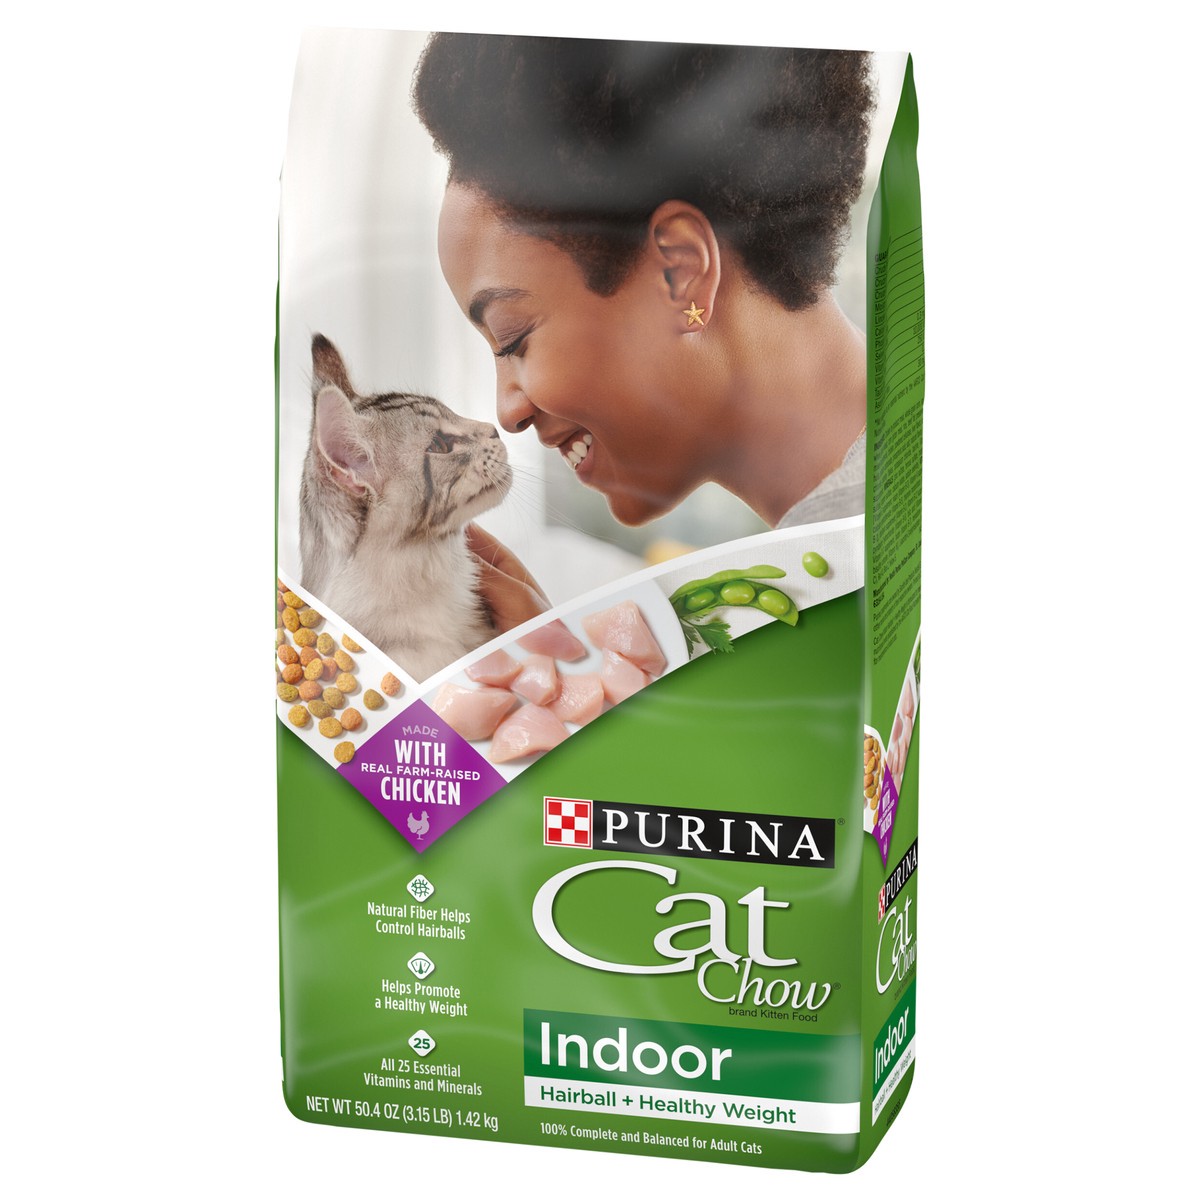 slide 4 of 9, Cat Chow Purina Cat Chow Indoor Dry Cat Food, Hairball + Healthy Weight, 3.15 lb